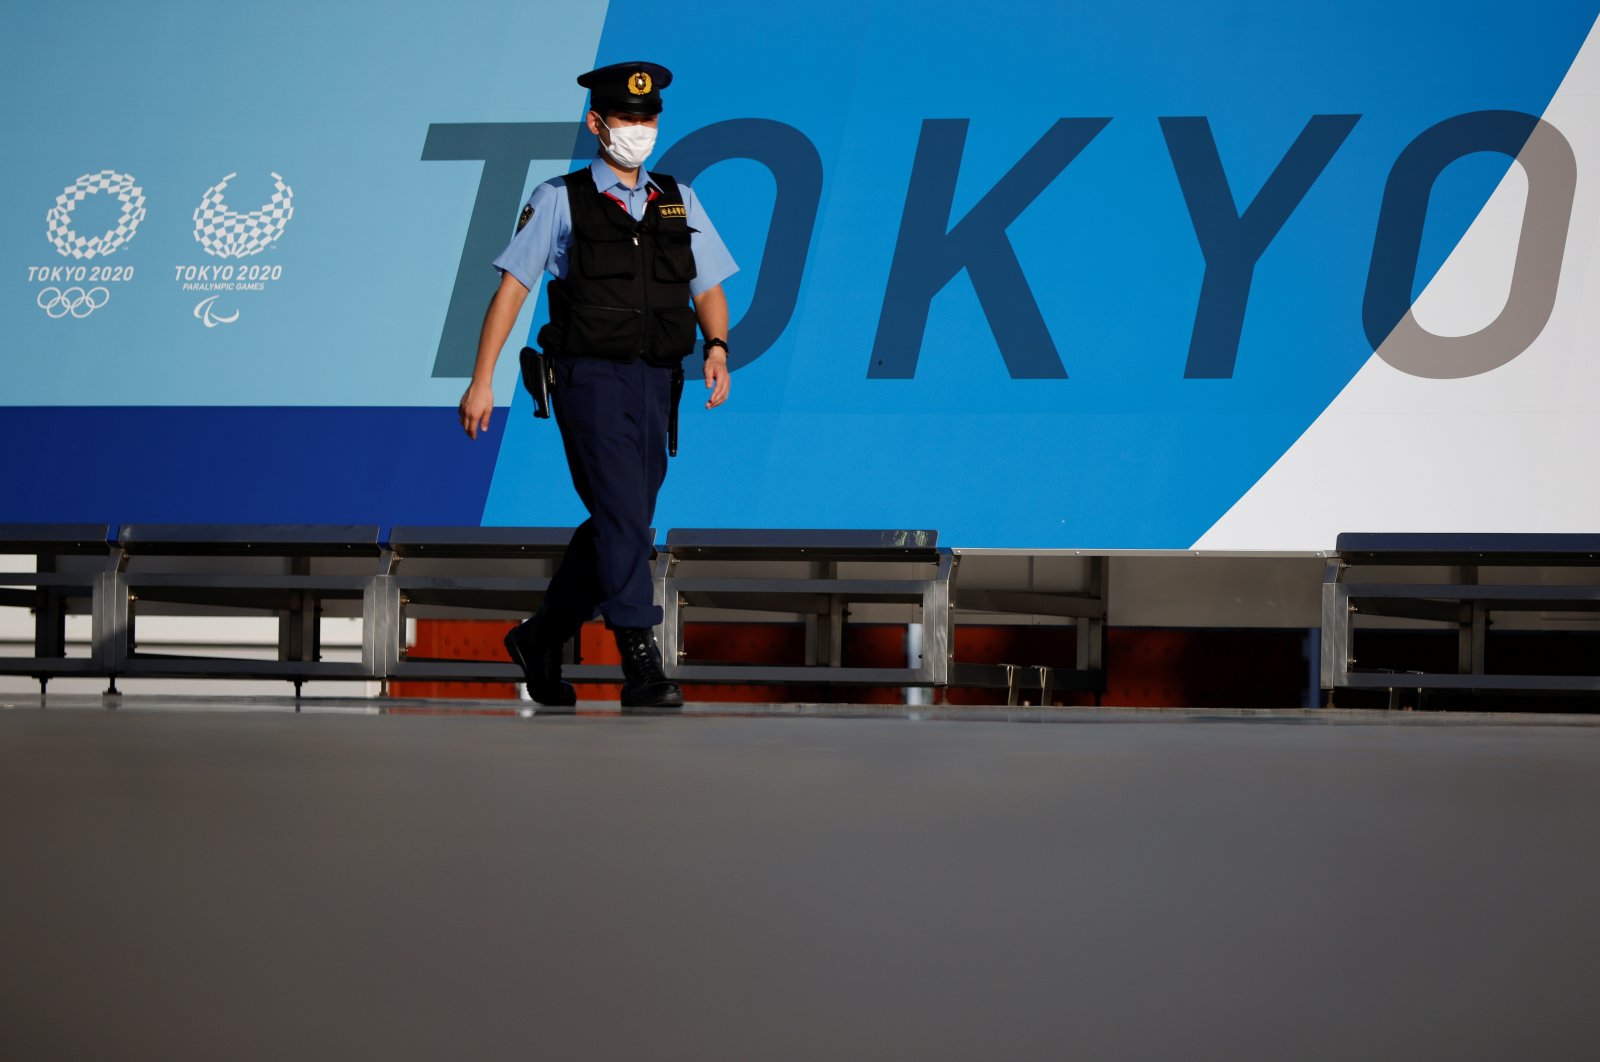 A police officer wearing a face mask walks past Tokyo 2020 Olympic Games signage at the Main Press Center during the coronavirus outbreak in Tokyo, Japan, July 16, 2021. (Reuters Photo)